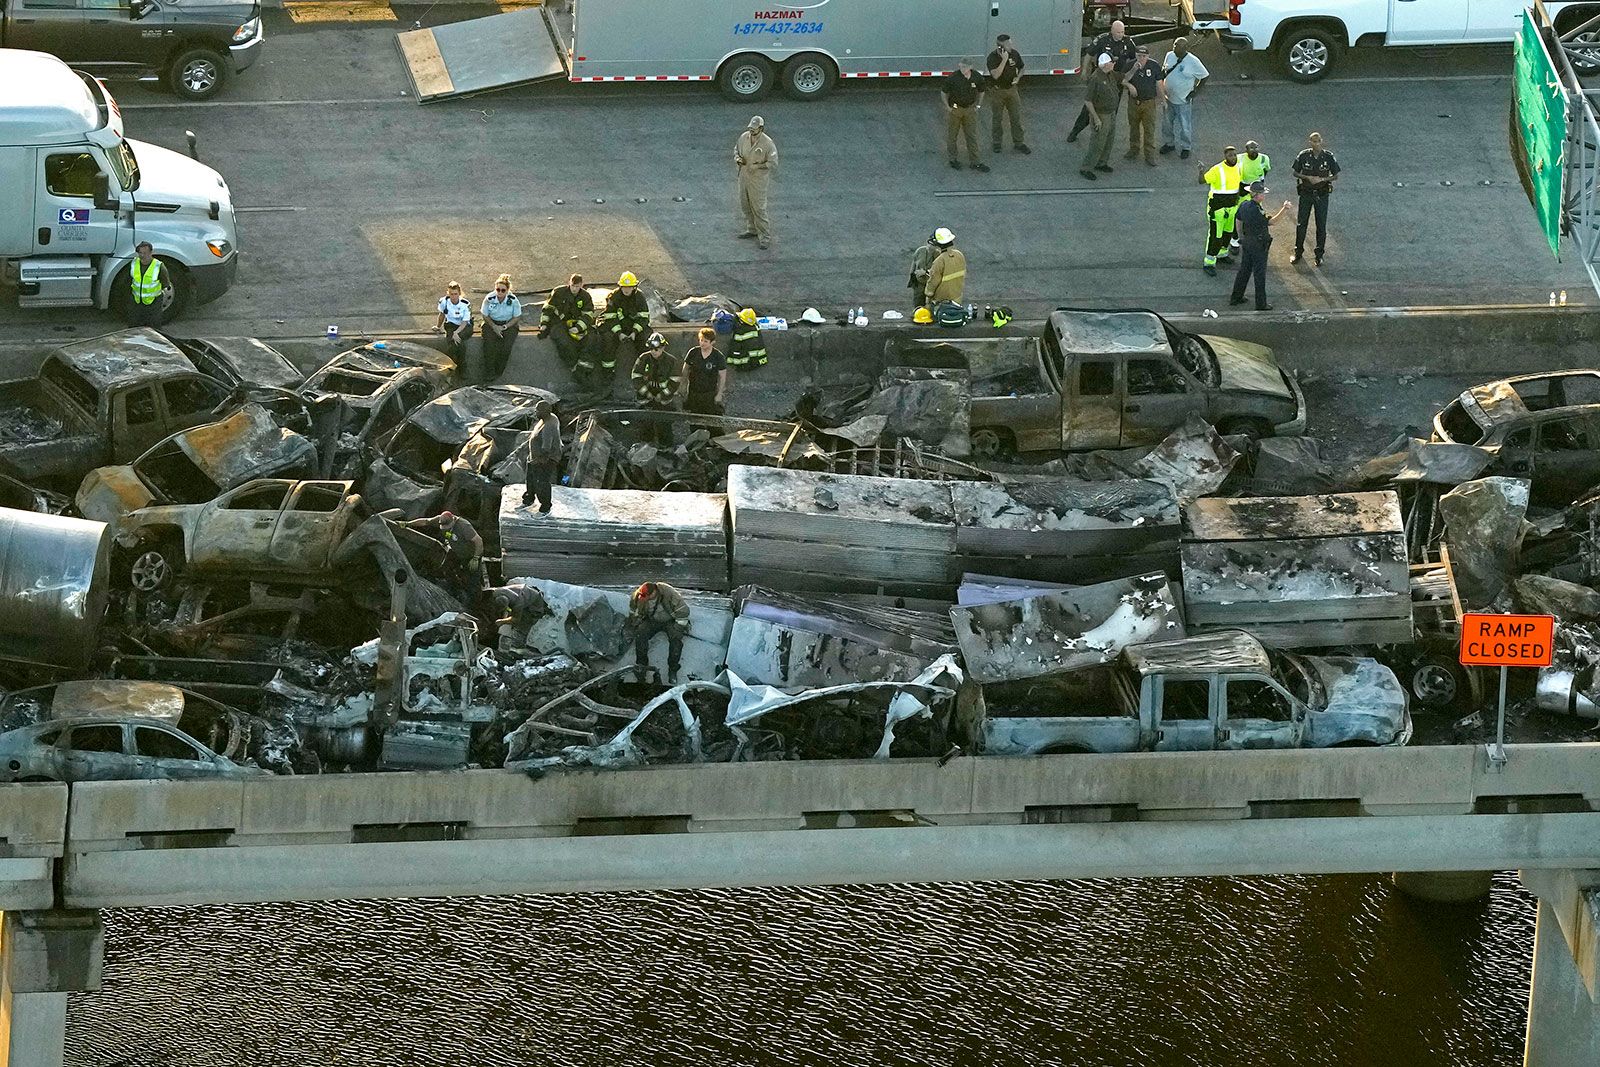 Wrecked Cars in the US Transported to Afghanistan